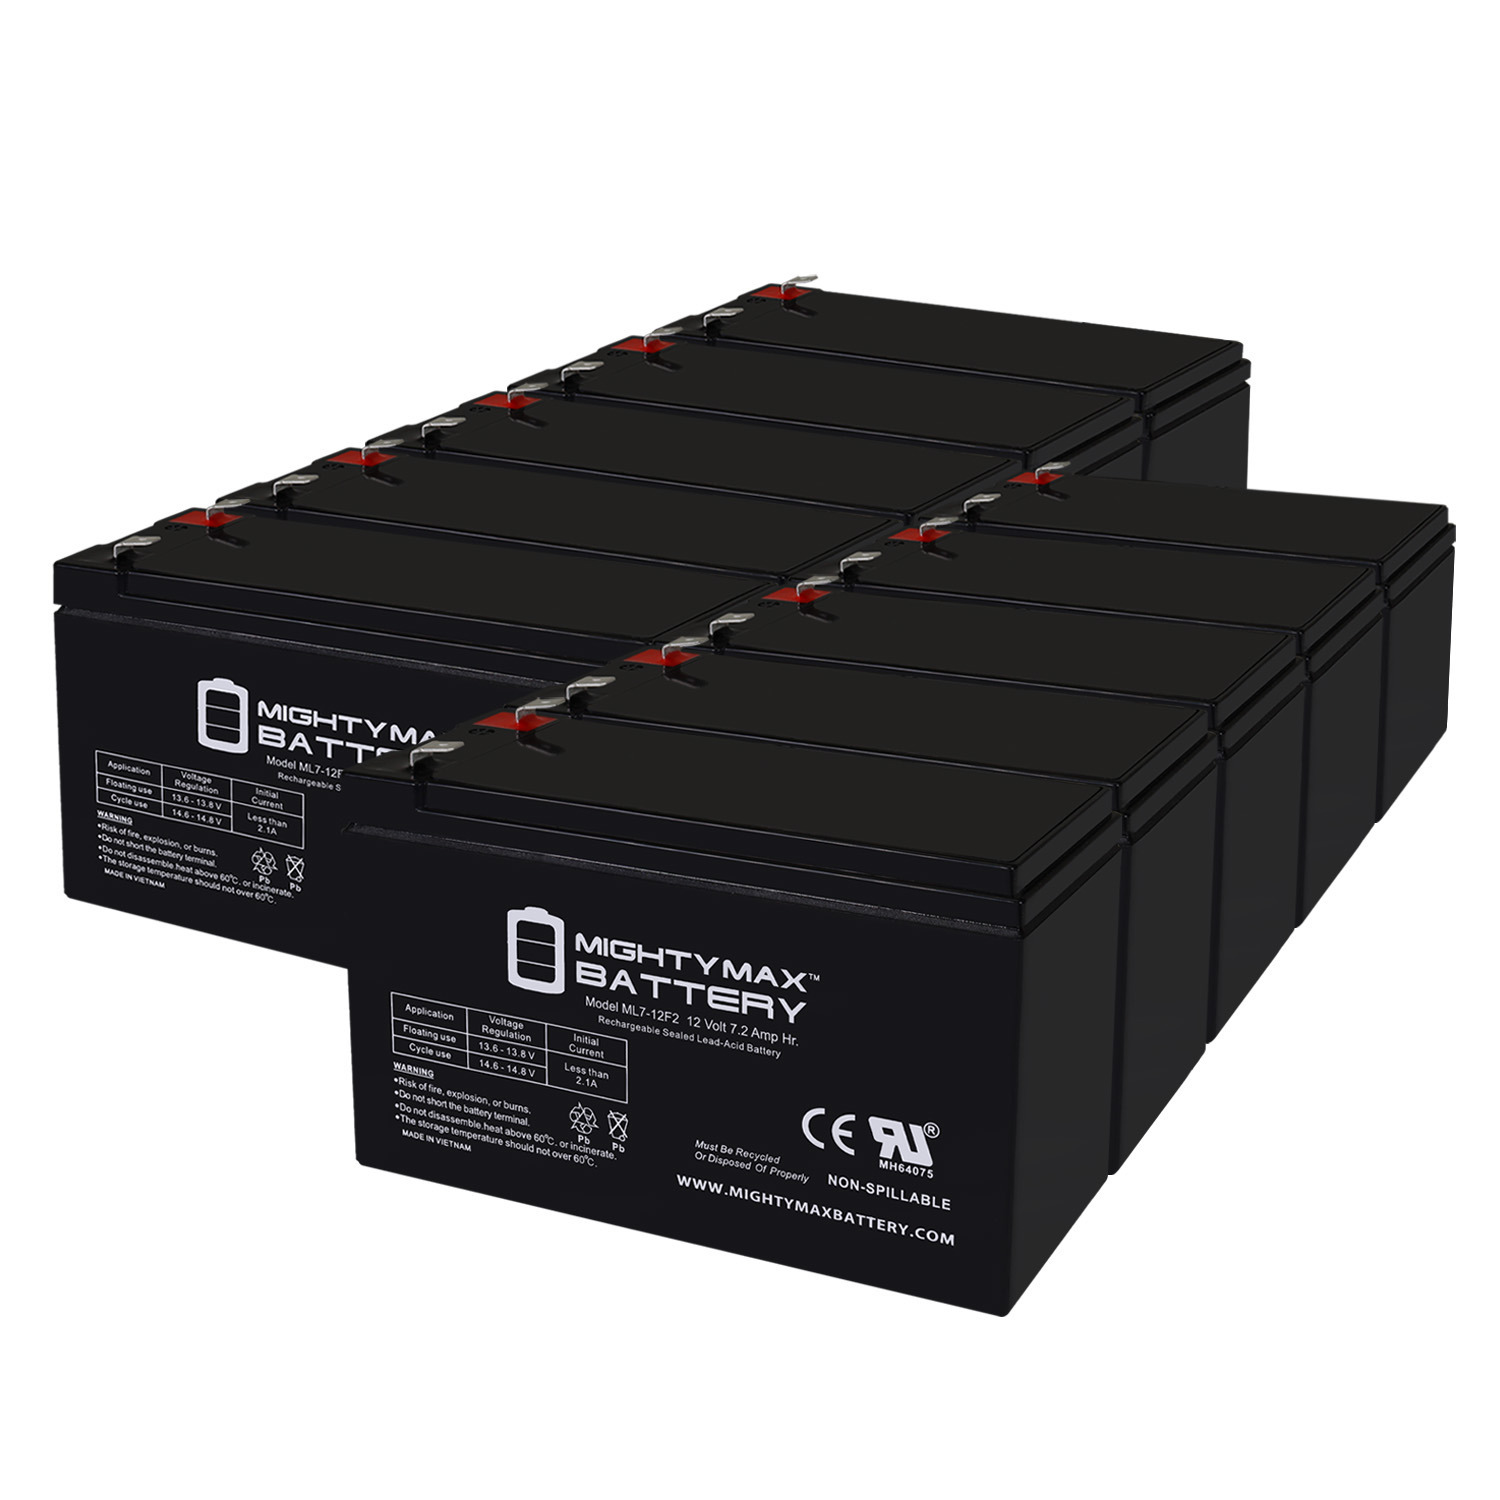 12V 7Ah F2 Replacement Battery for CyberPower AVR 800VA UPS - 10 Pack